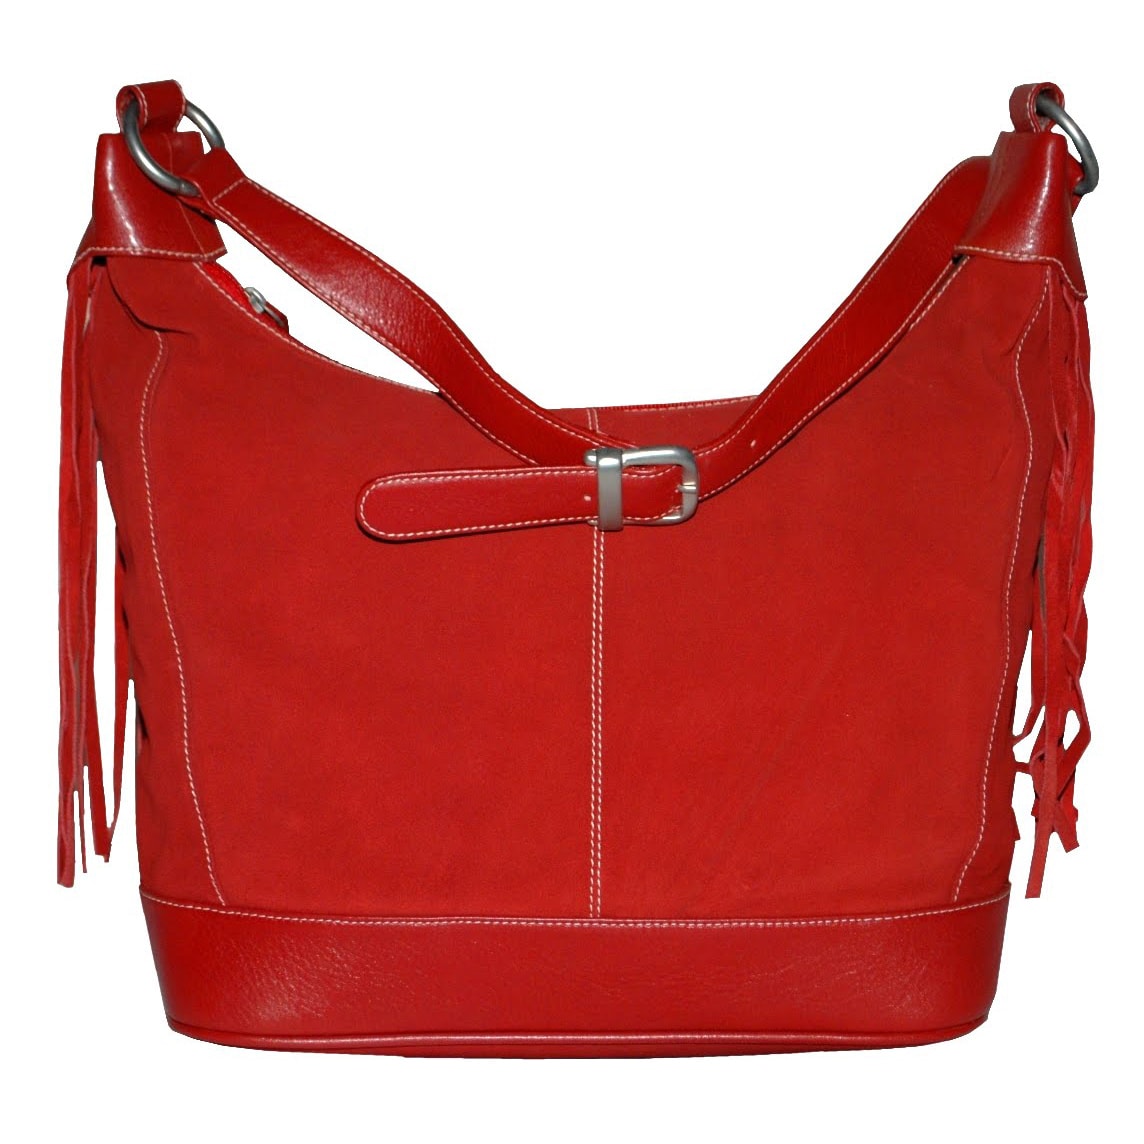 Suede Handbags Shoulder Bags, Tote Bags and Leather